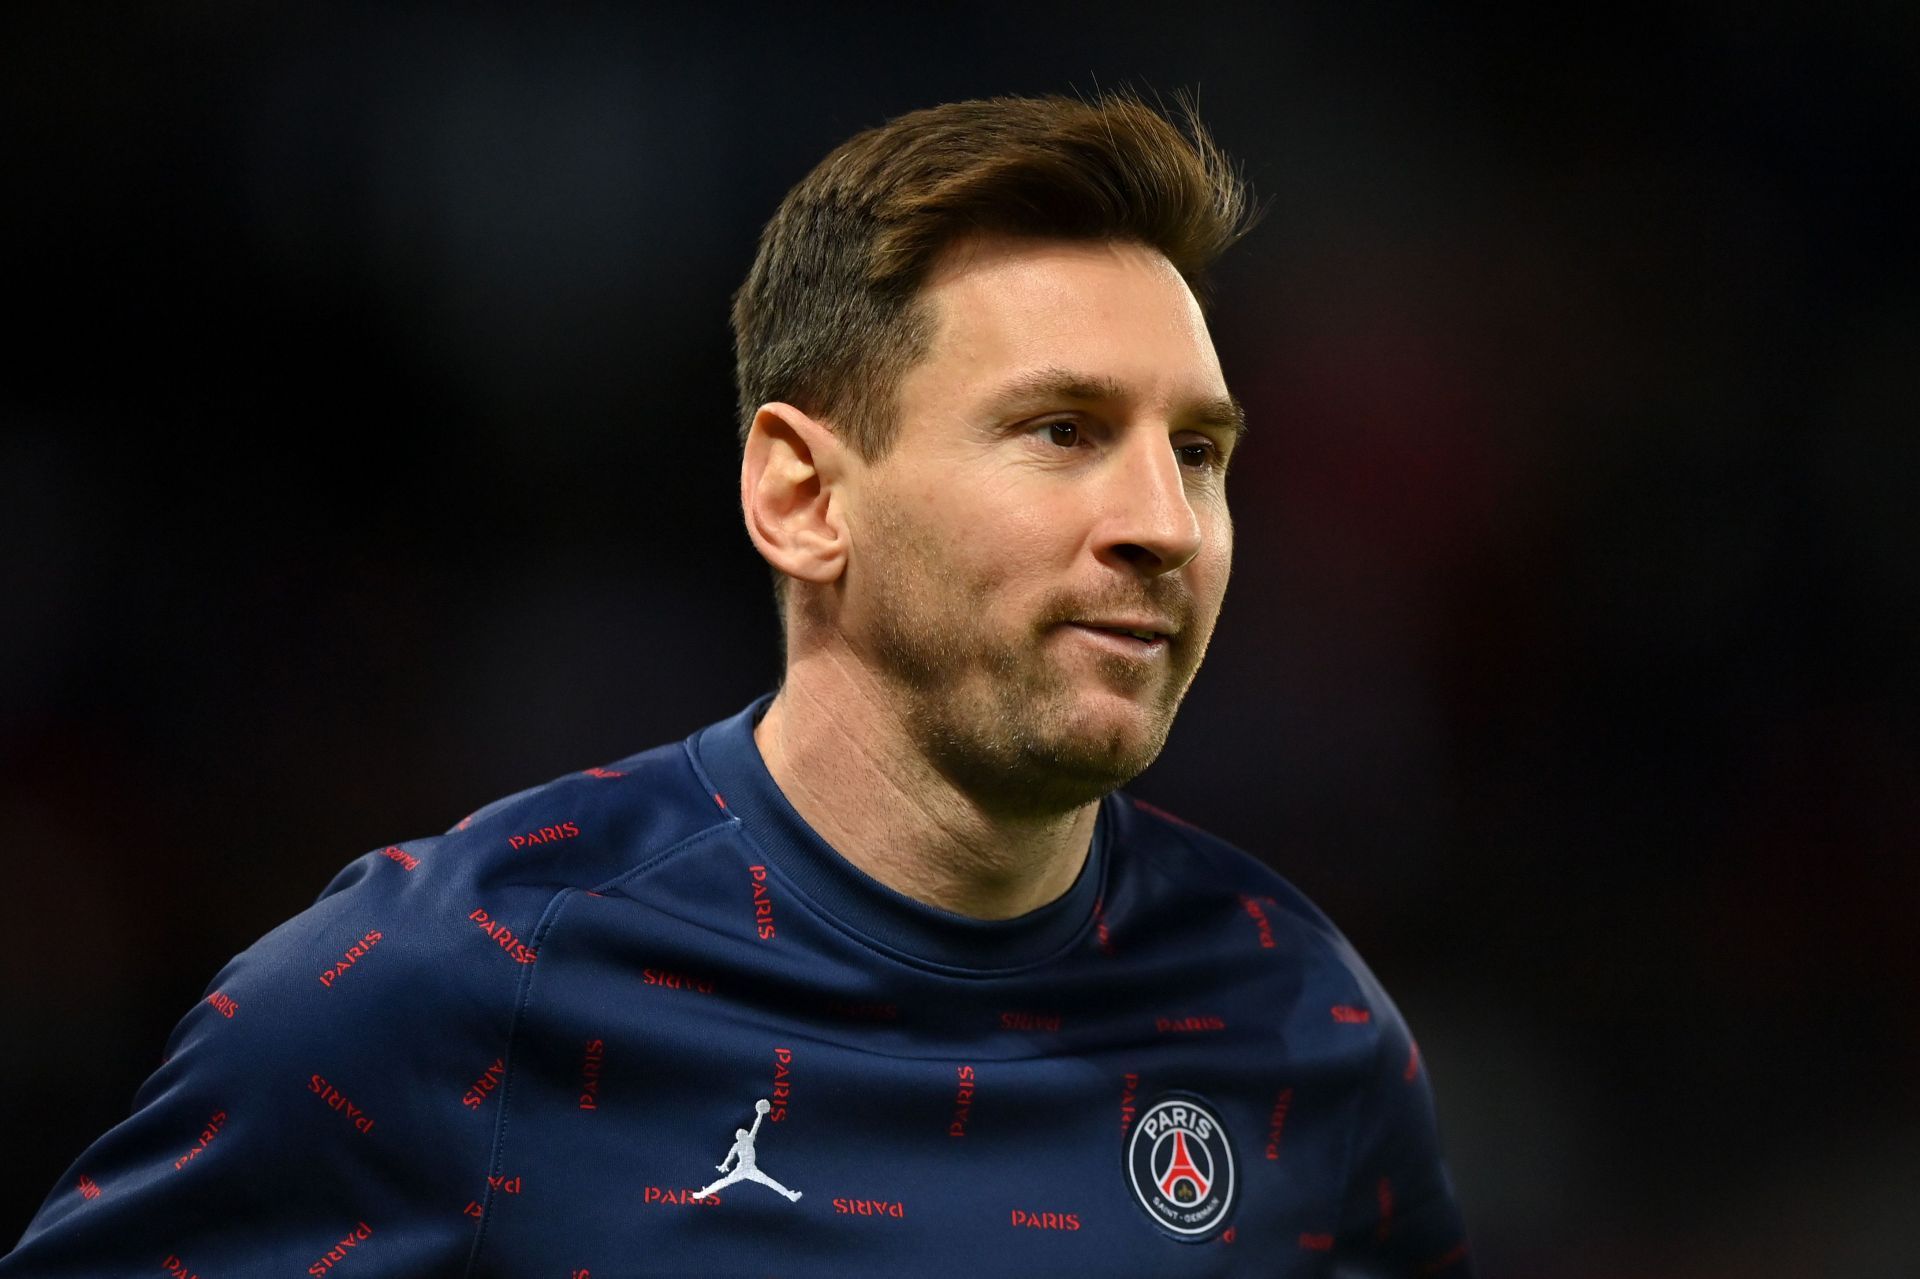 Paris Saint-Germain star Lionel Messi is yet to score a goal in Ligue 1 this season